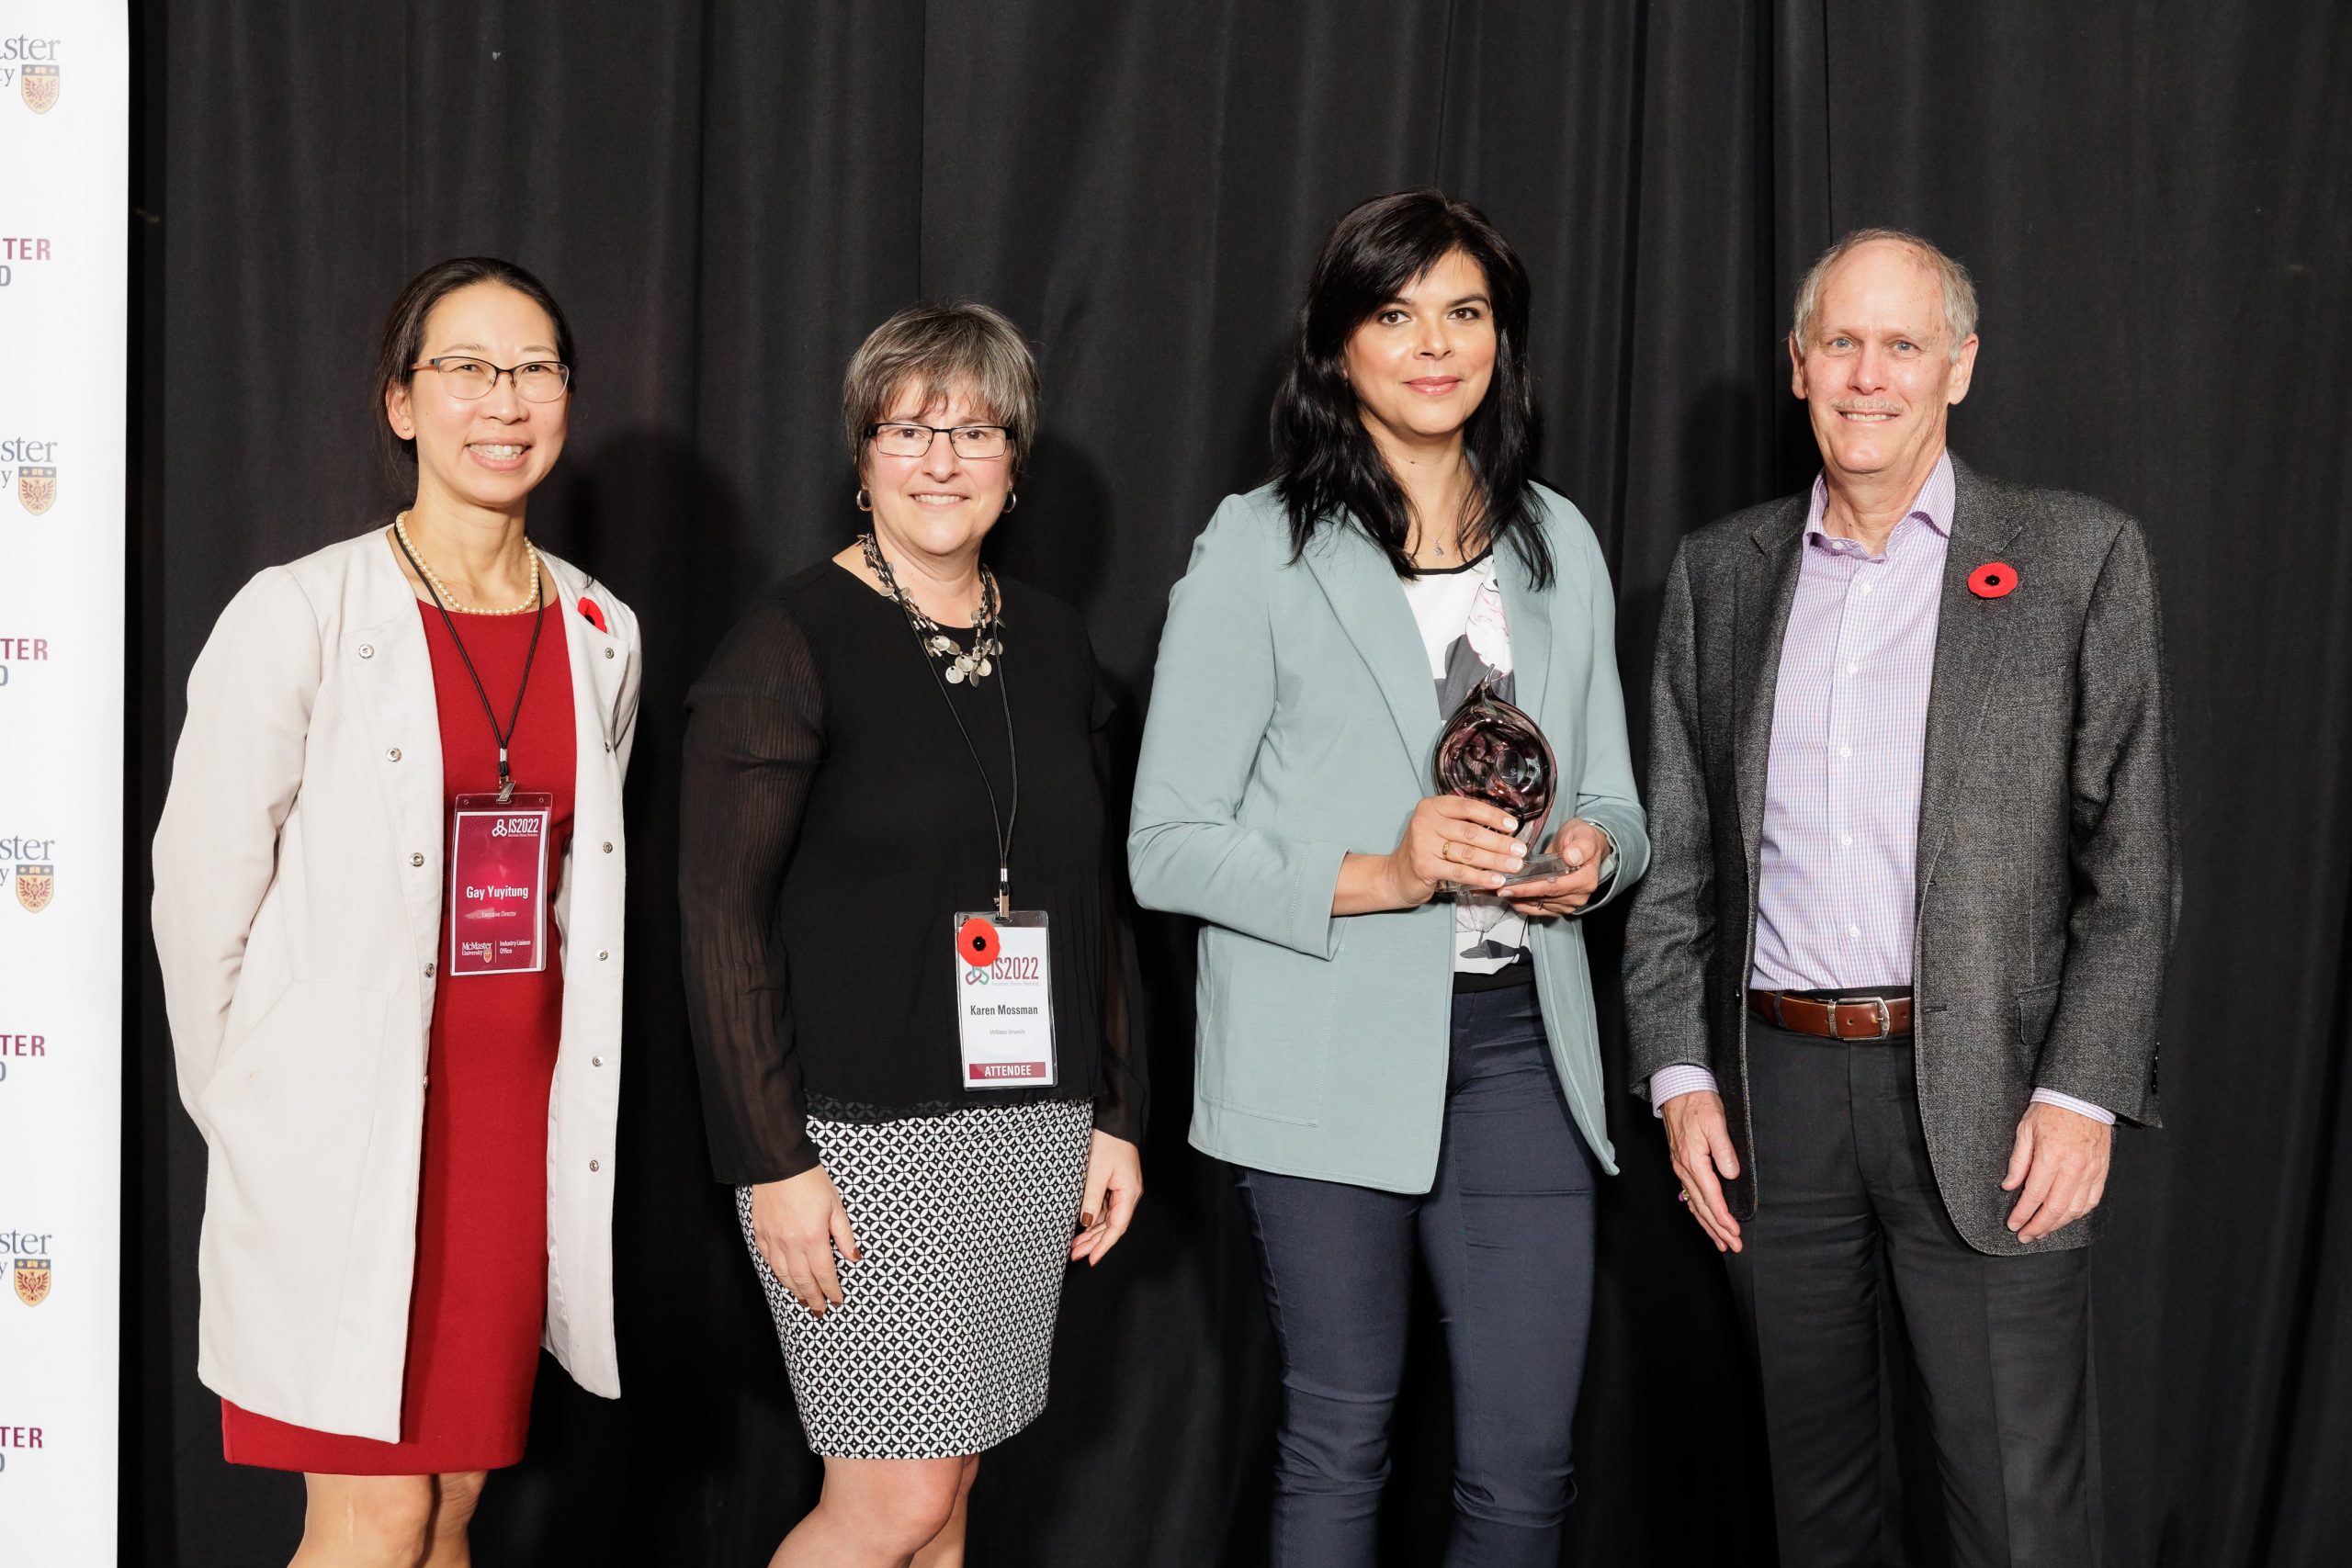 Gina Agarwal is presented the Innovator of the Year award by Gay Yuyitung, executive director of MILO, Karen Mossman, vice-president, research, and David Farrar, president.